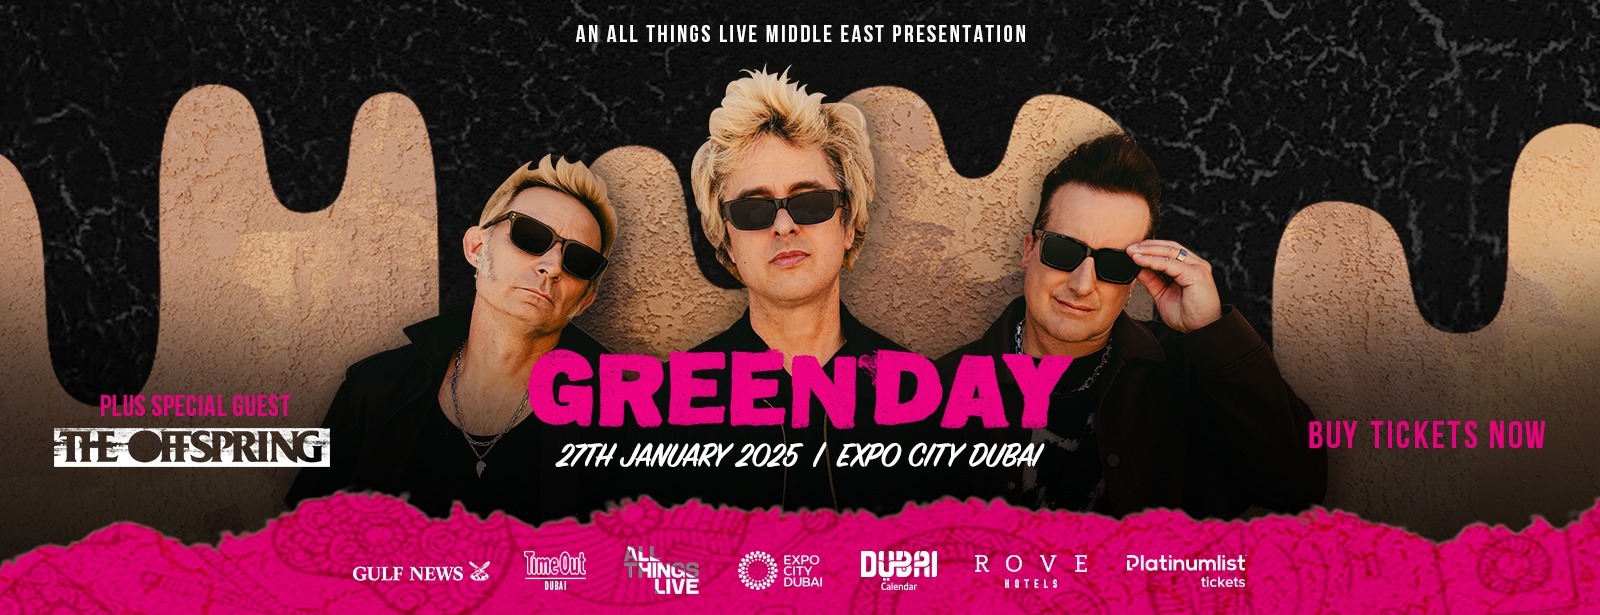 Green Day Live in Dubai Expo City - Coming Soon in UAE